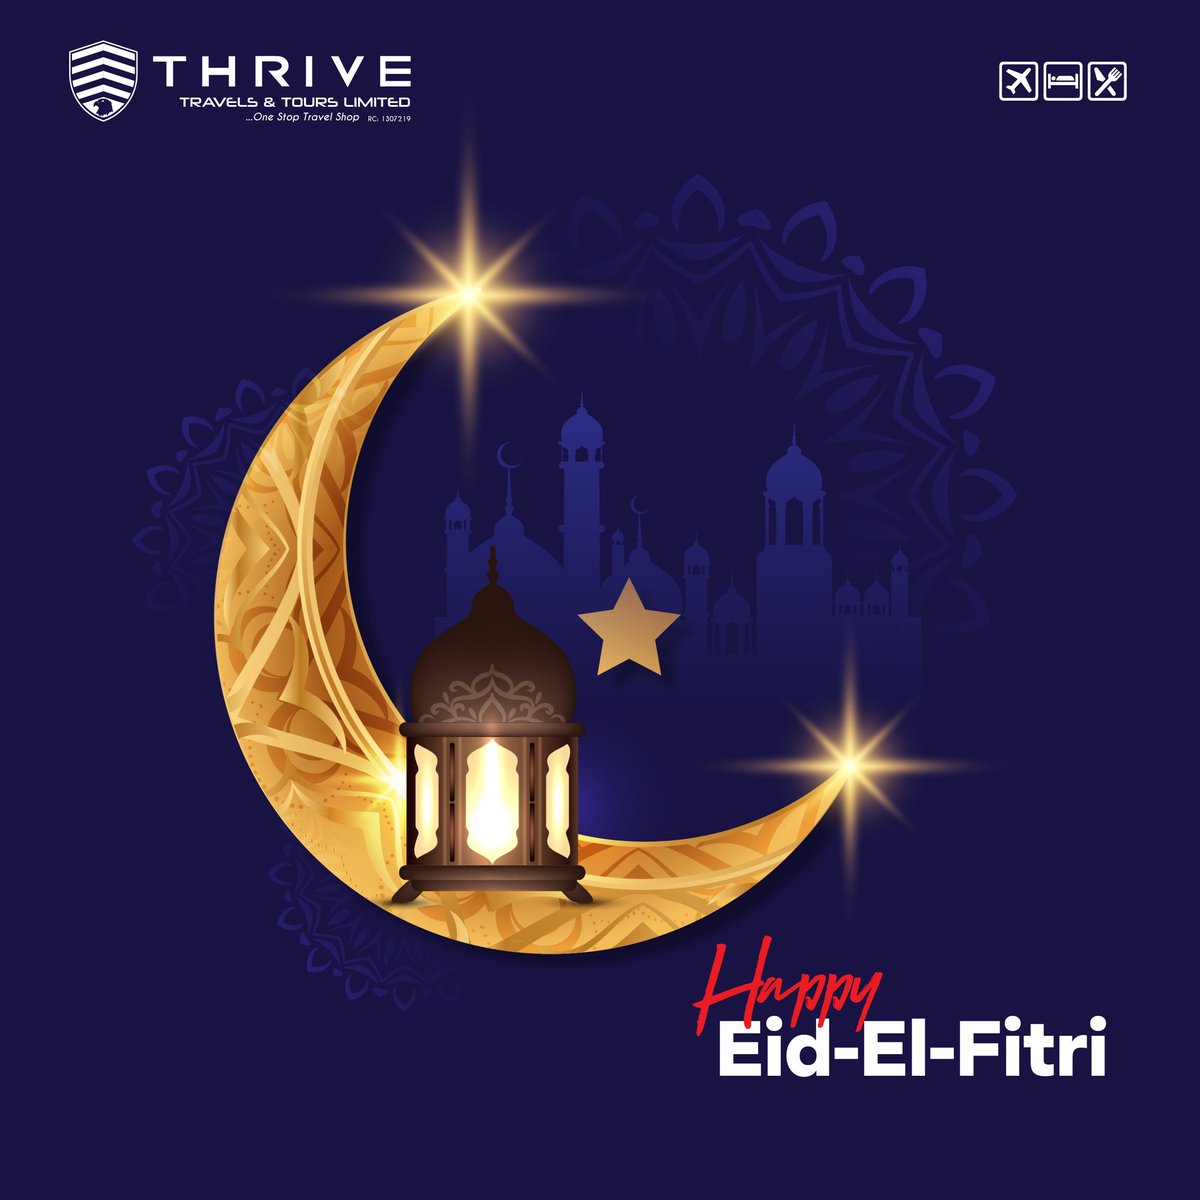 May Allah open doors of success and bless you and your family today and always.

Happy Eid-El-Fitri.
.
#thrivetravelsandtours #eid #eidelfitri #celebration #travels